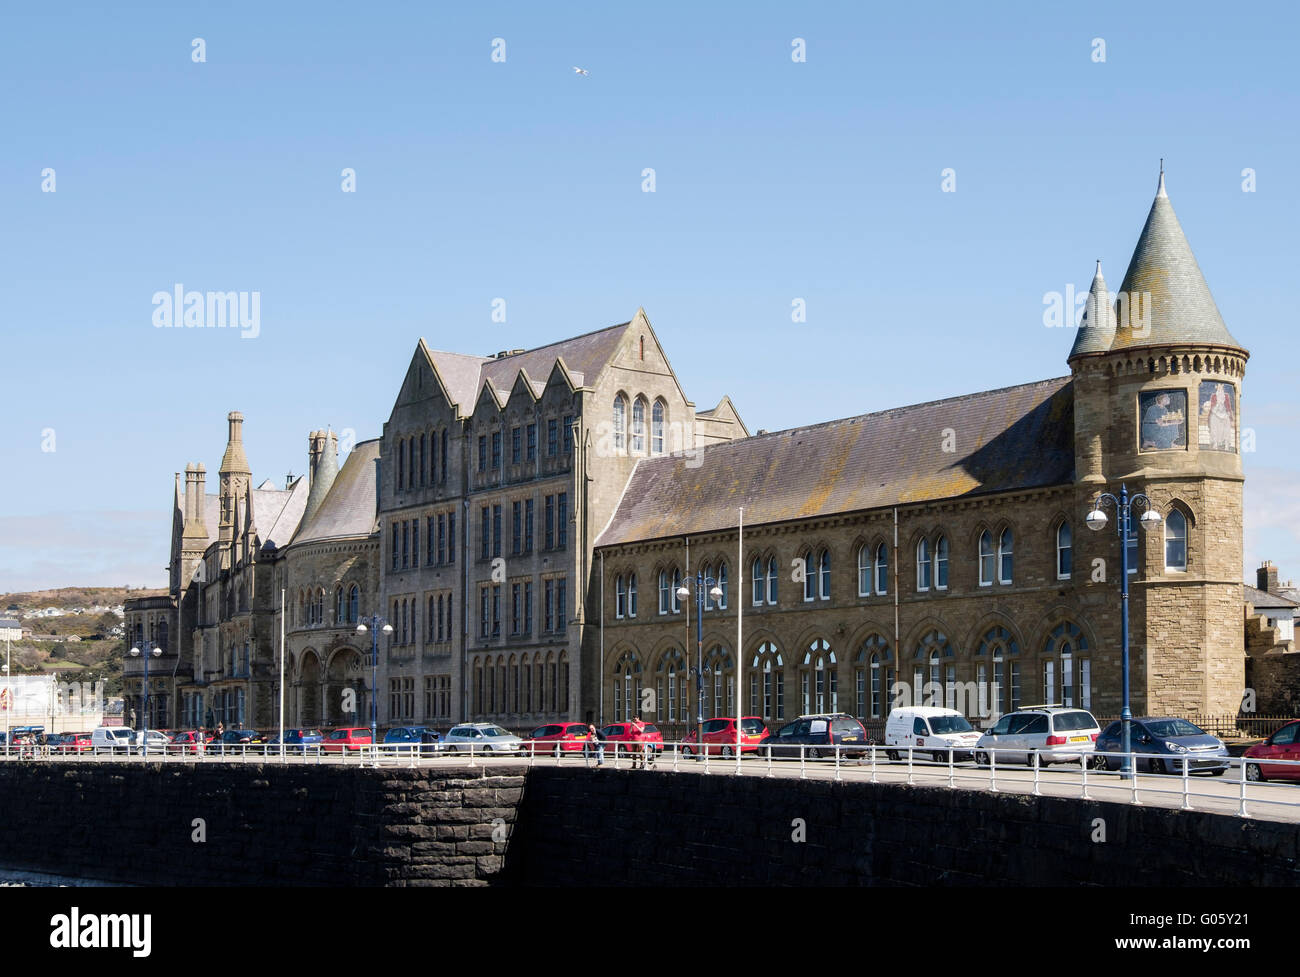 The Old College building of University of Wales on seafront. Built 1870's to J.P.Seddon's Gothic design. Aberystwyth Wales UK Stock Photo